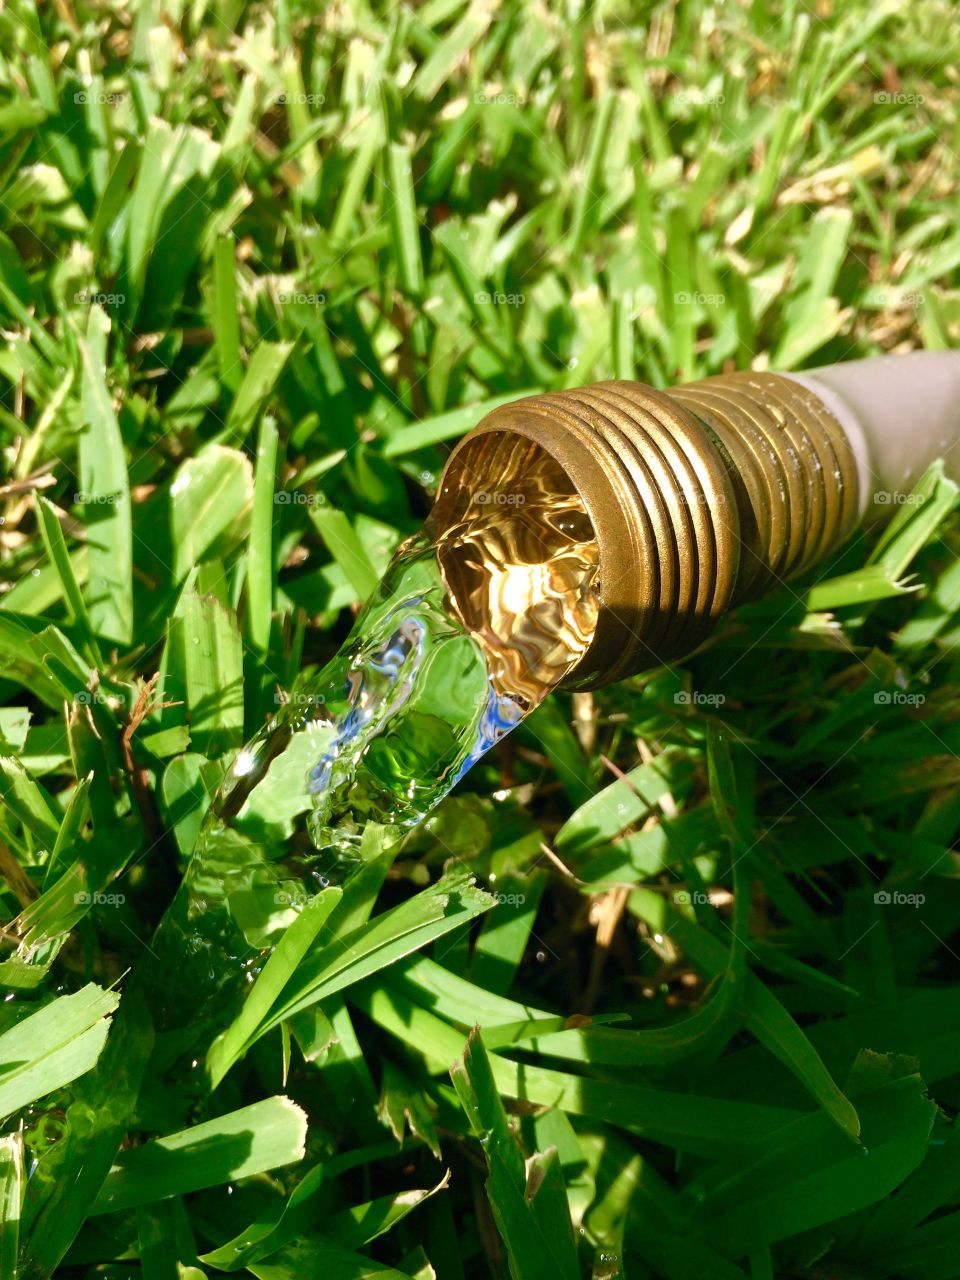 Water hose. Water hose in grass 